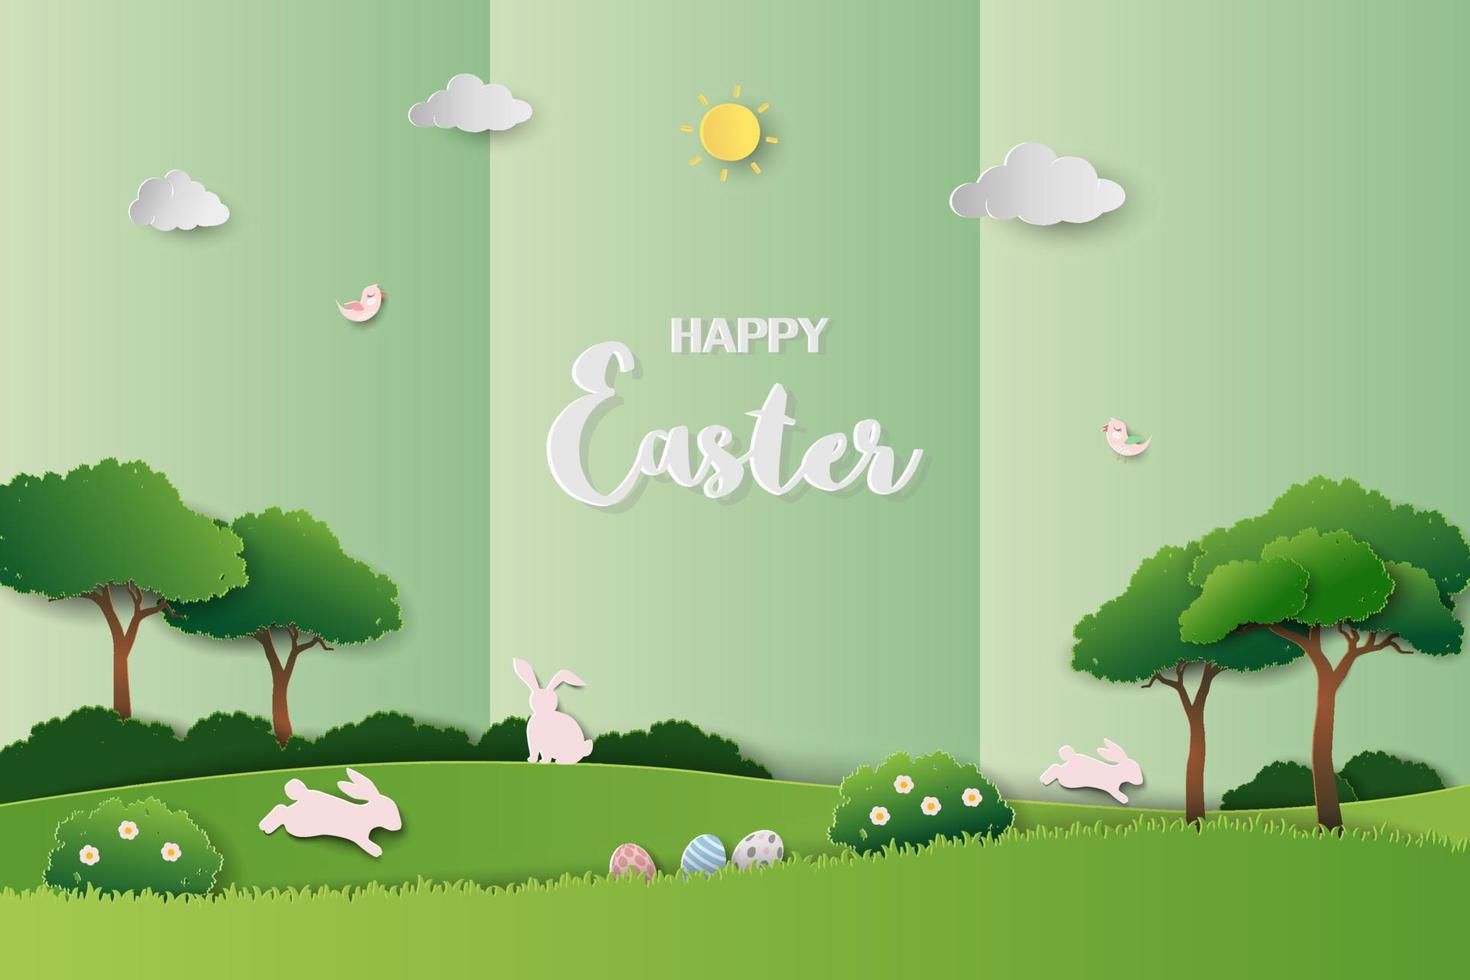 Happy easter greeting card on green paper craft background,rabbits jumping on grass for festive spring holiday,poster,banner or wallpaper vector